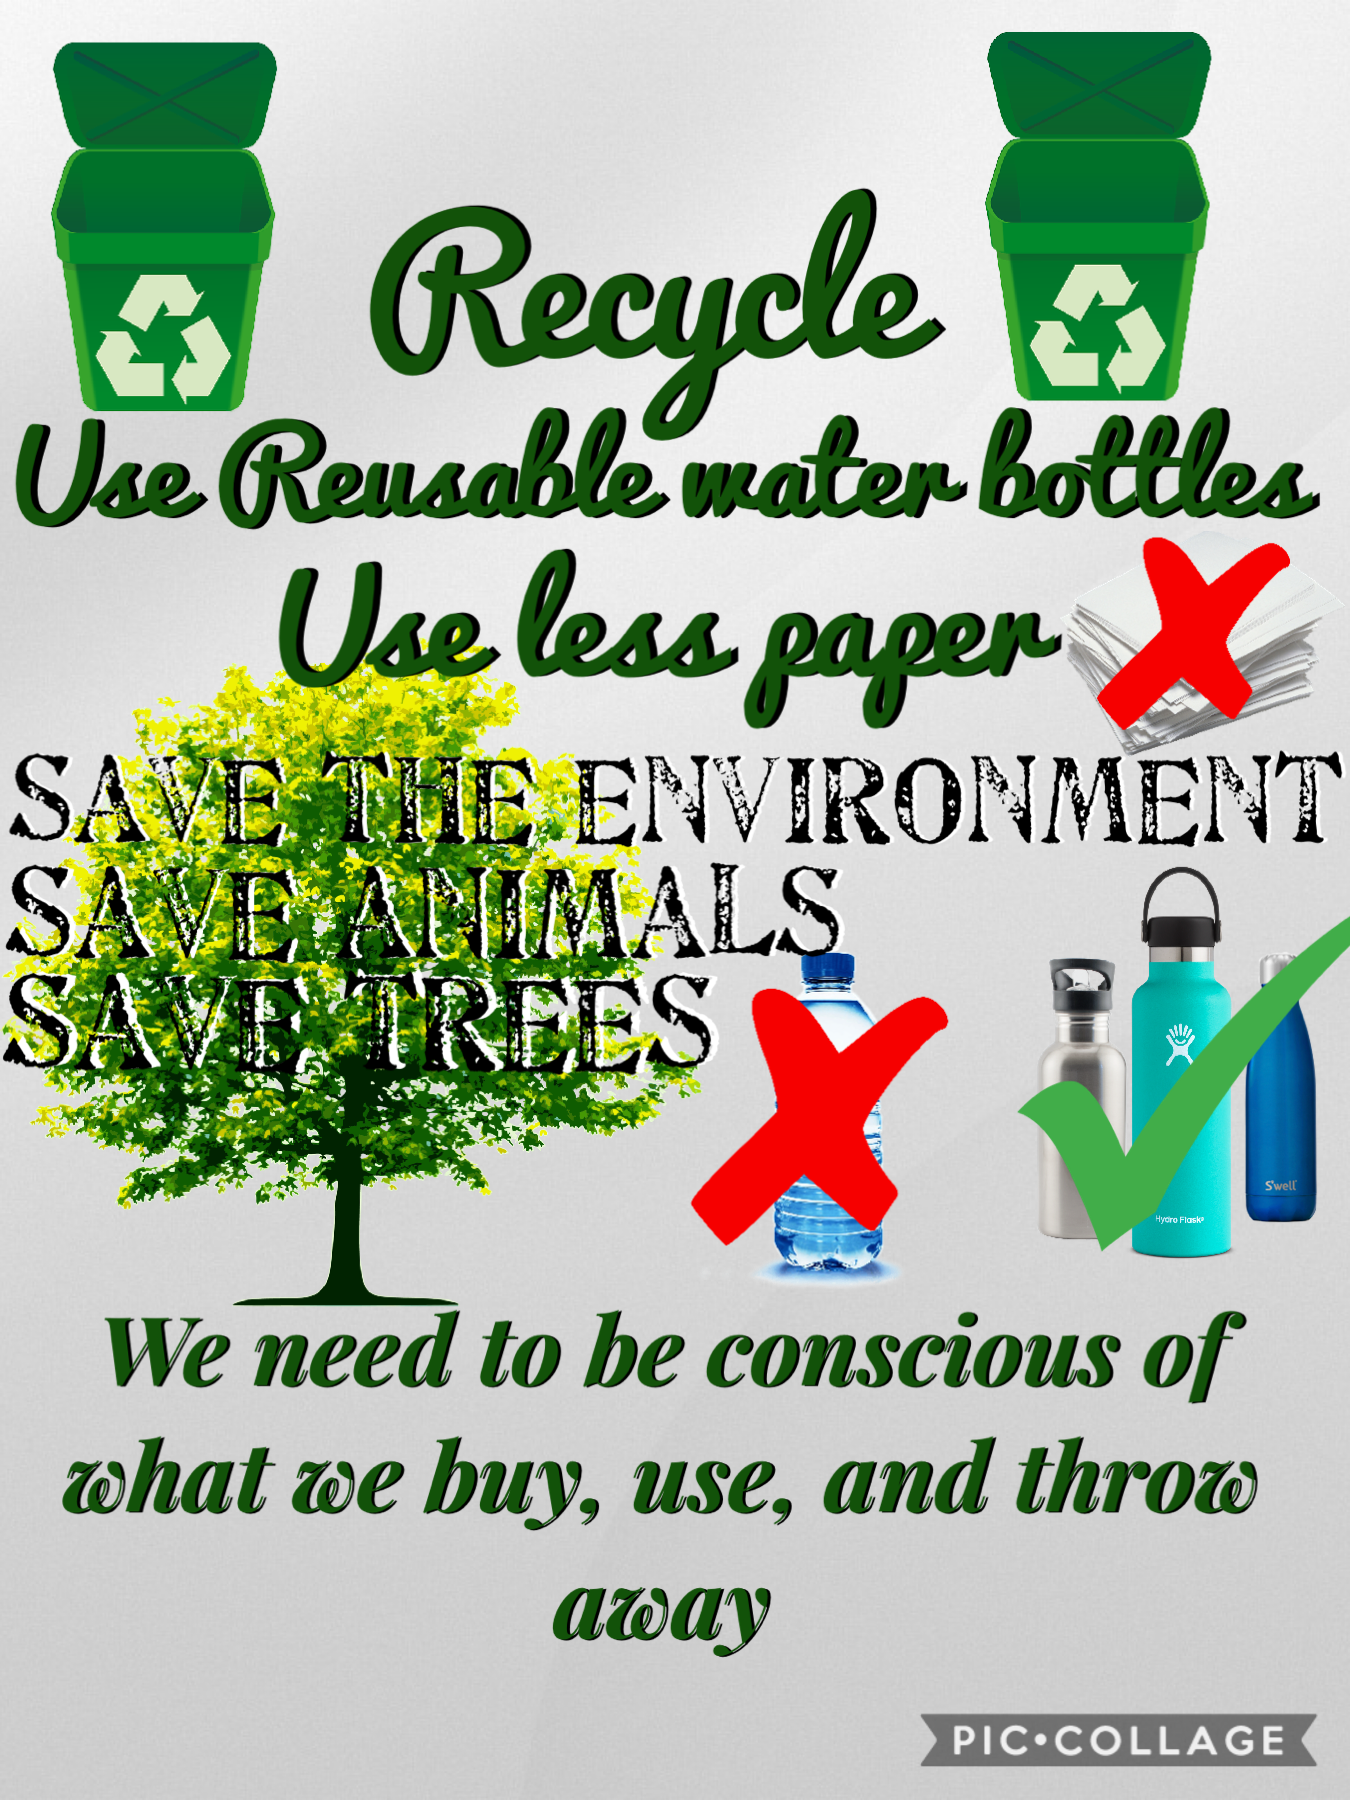 Save the environment